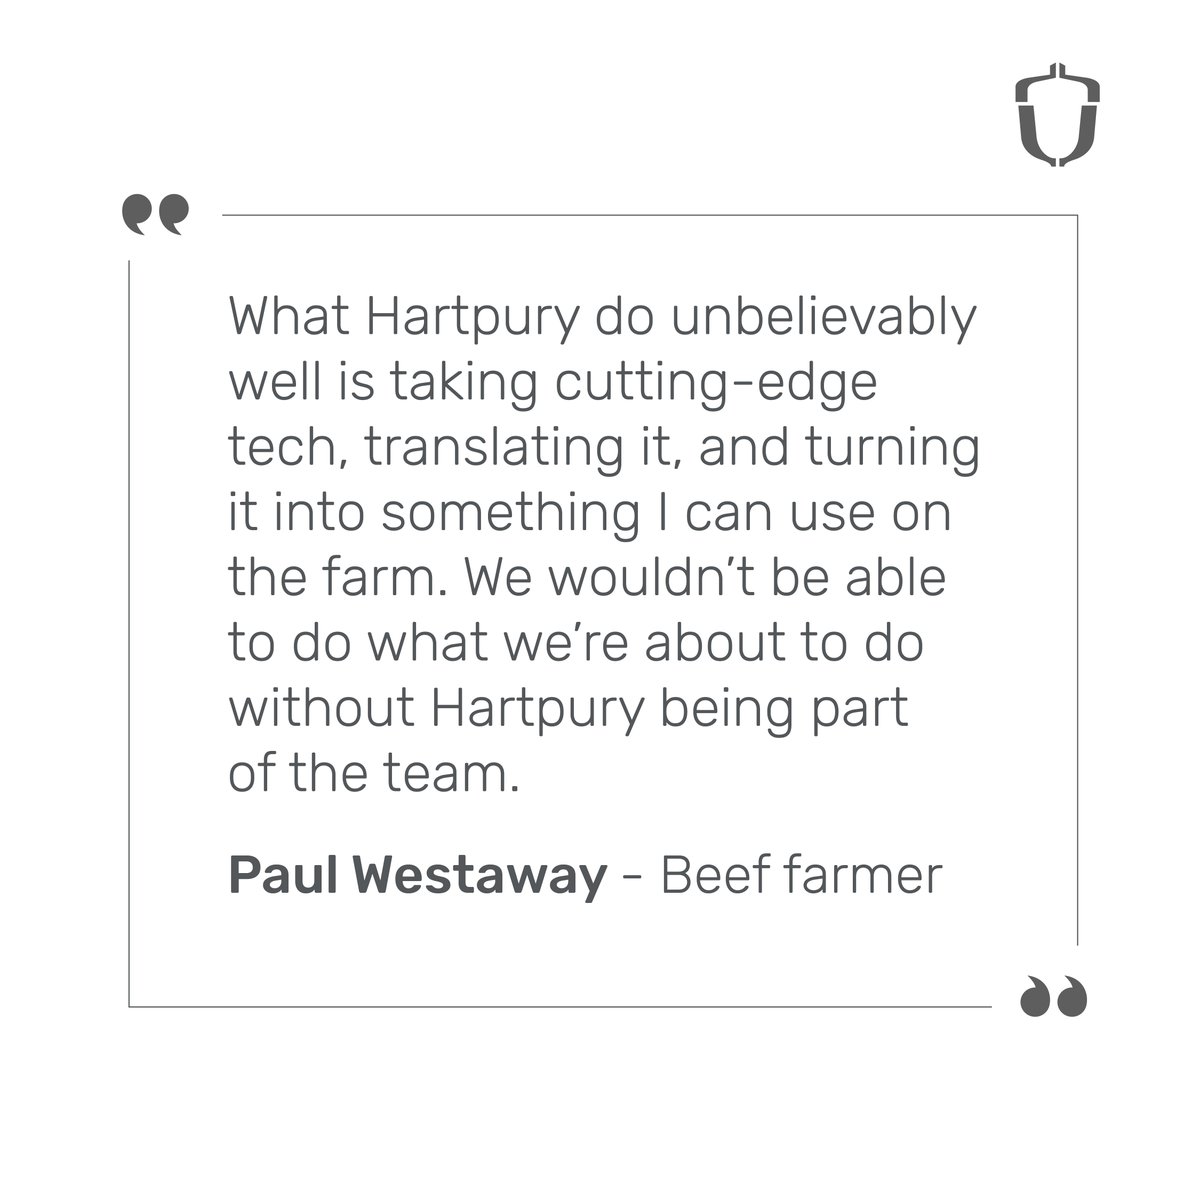 “What Hartpury do unbelievably well is taking cutting-edge tech, translating it, & turning it into something I can use on the farm” (Paul Westaway, Beef Farmer). Interested in finding out how our agri-coaching services could work for you? Chat with us at agri-tech@hartpury.ac.uk